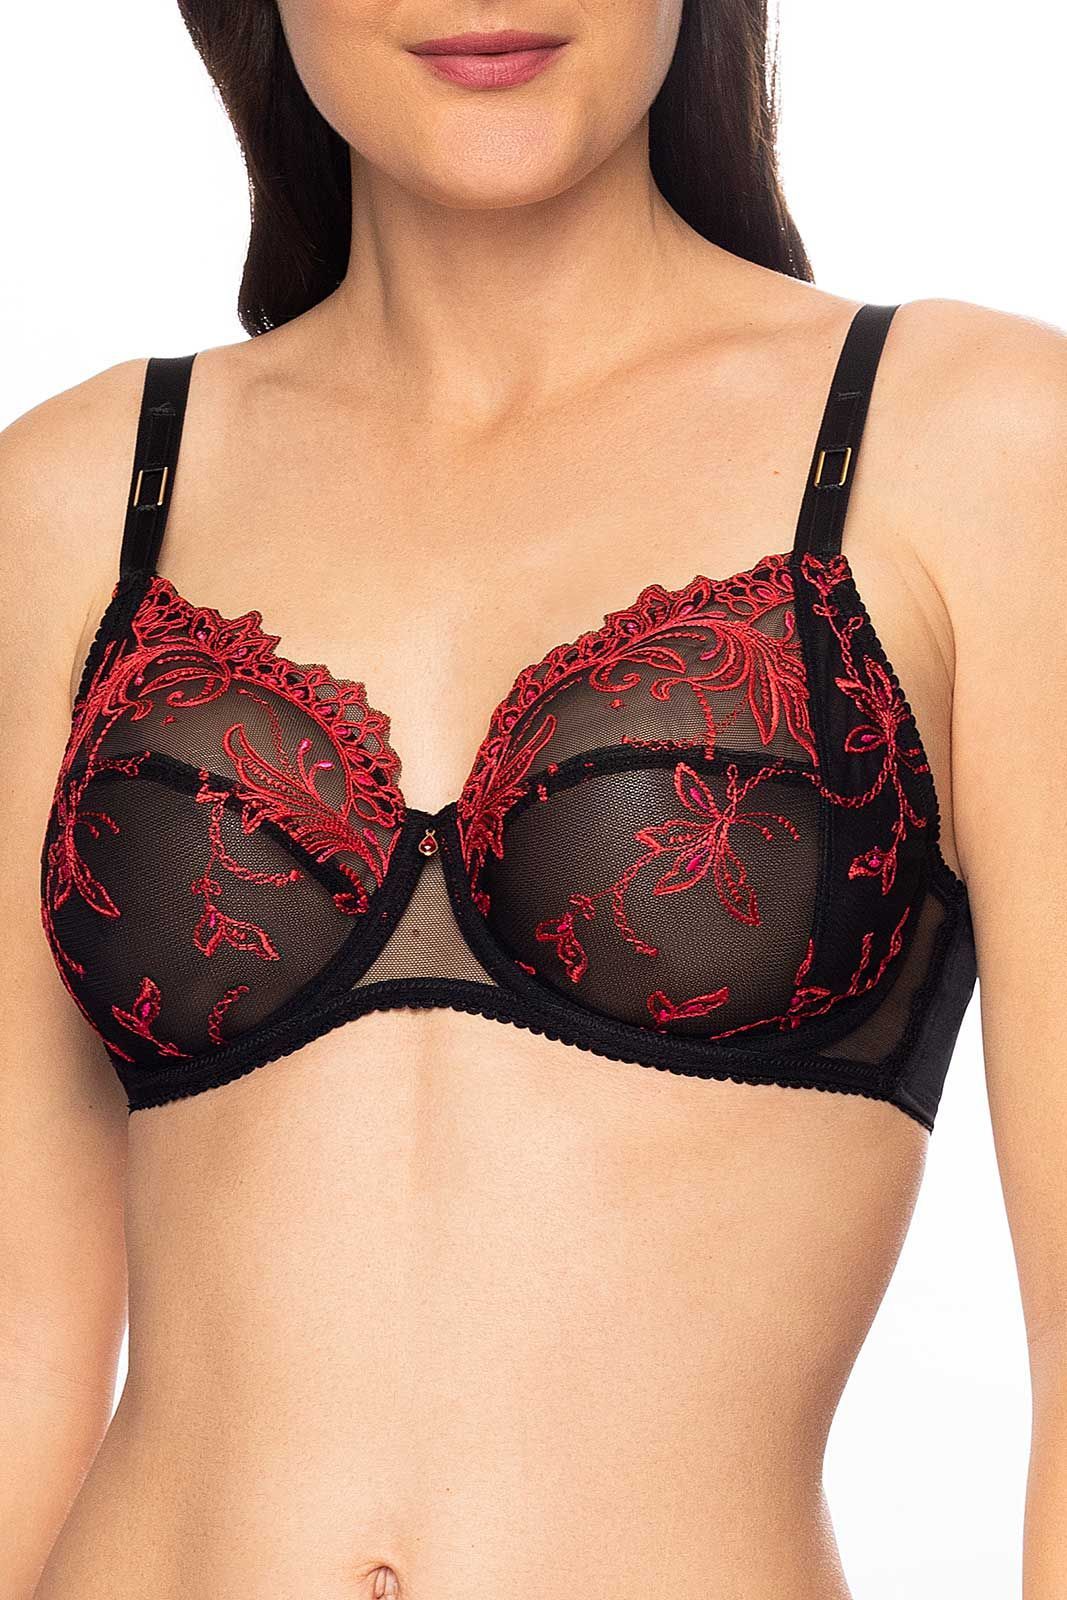 Eprise G90 Rencontre Intime Underwired full cup bra 18041 SF/SEXY FLASH buy  for the best price CAD$ 235.00 - Canada and U.S. delivery – Bralissimo